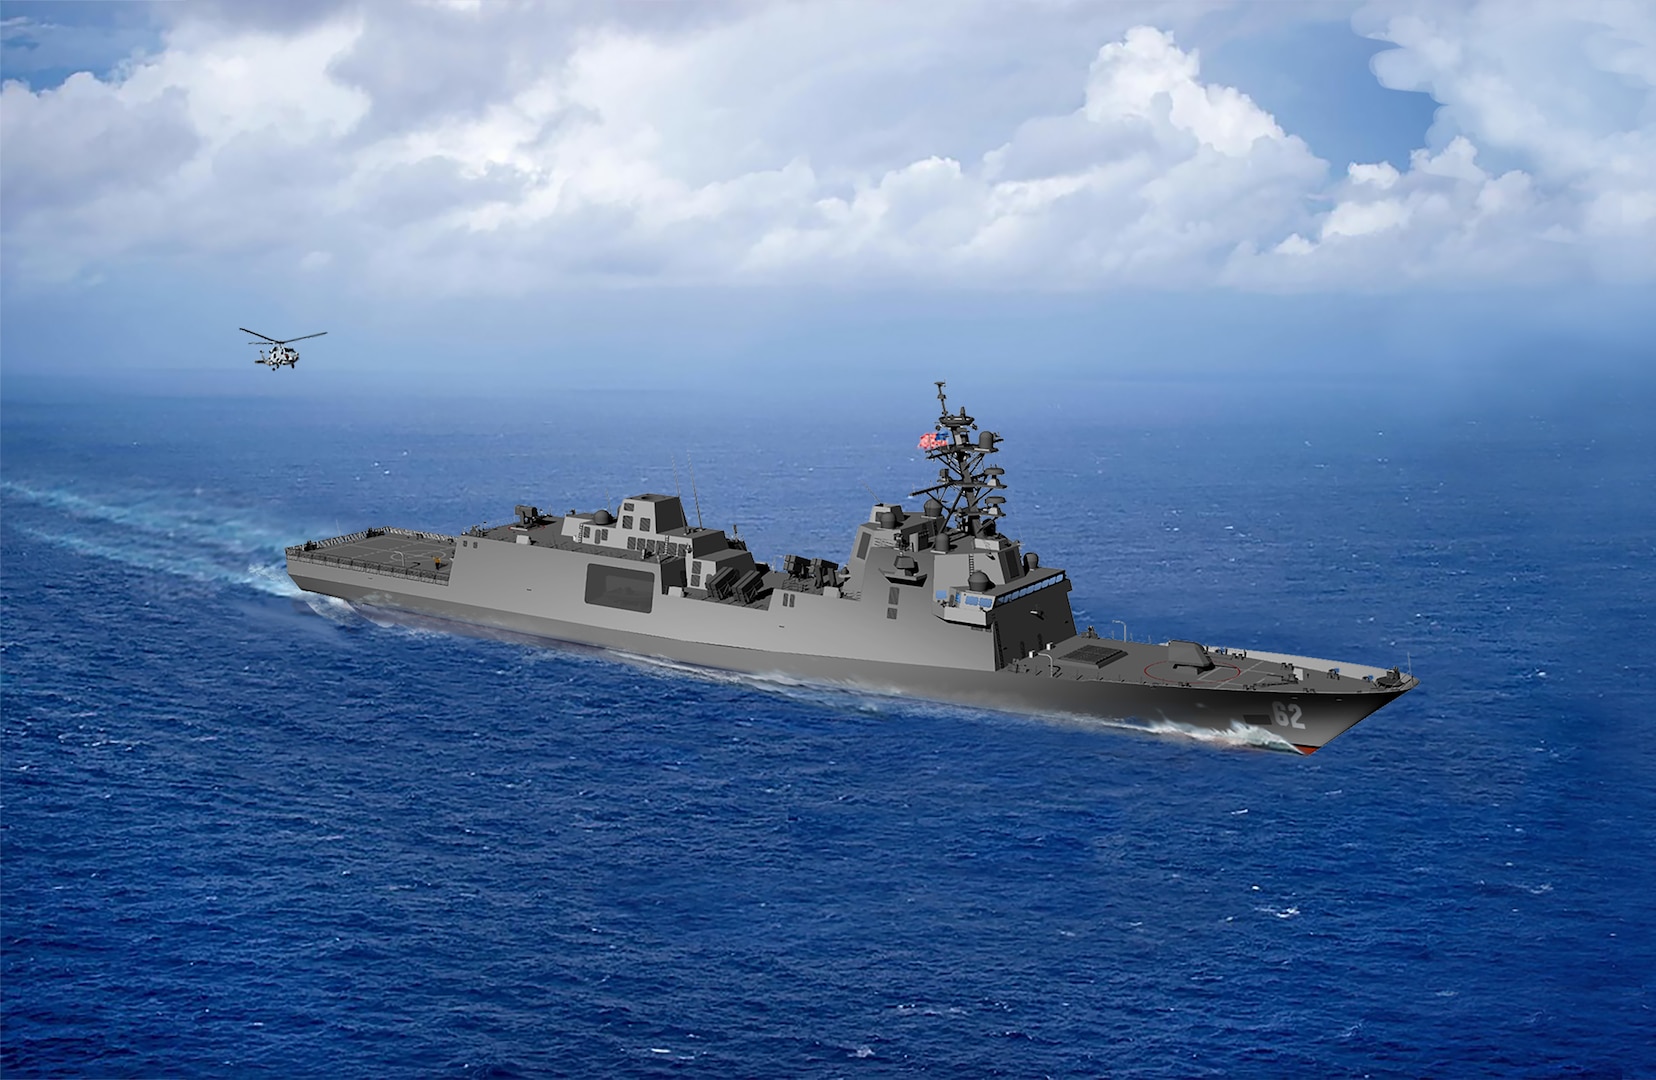 An artist rendering of the guided-missile frigate FFG(X). The U.S.Navy awarded a contract to design and produce the next generation small surface combatant, the Guided Missile Frigate on April 30.